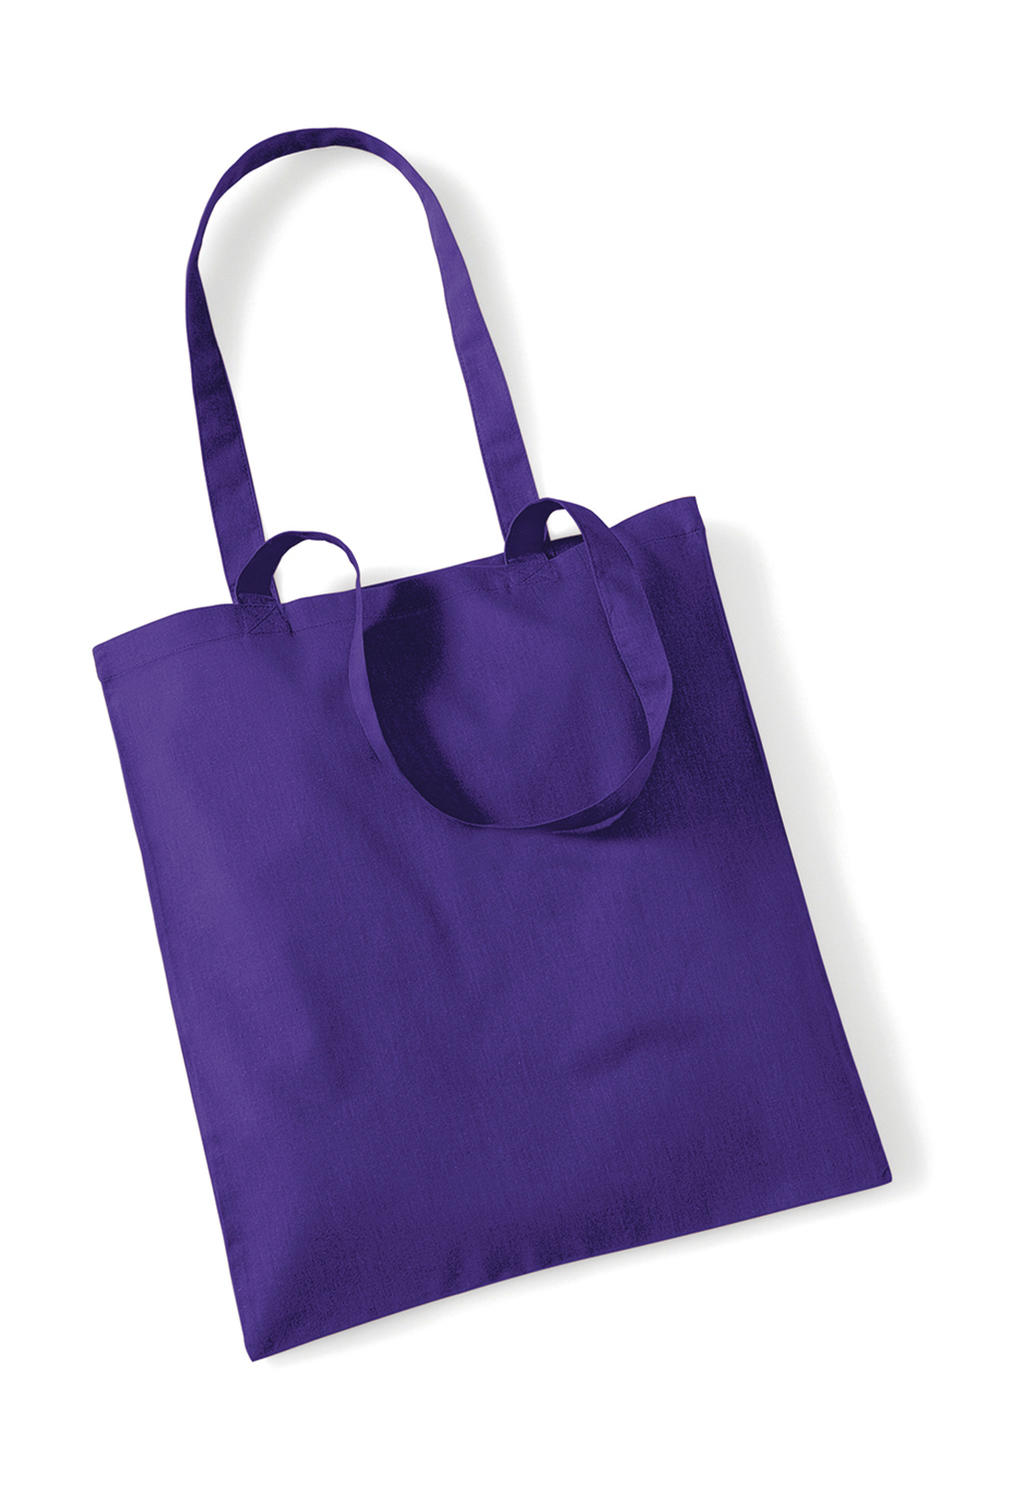  Bag for Life - Long Handles in Farbe Purple